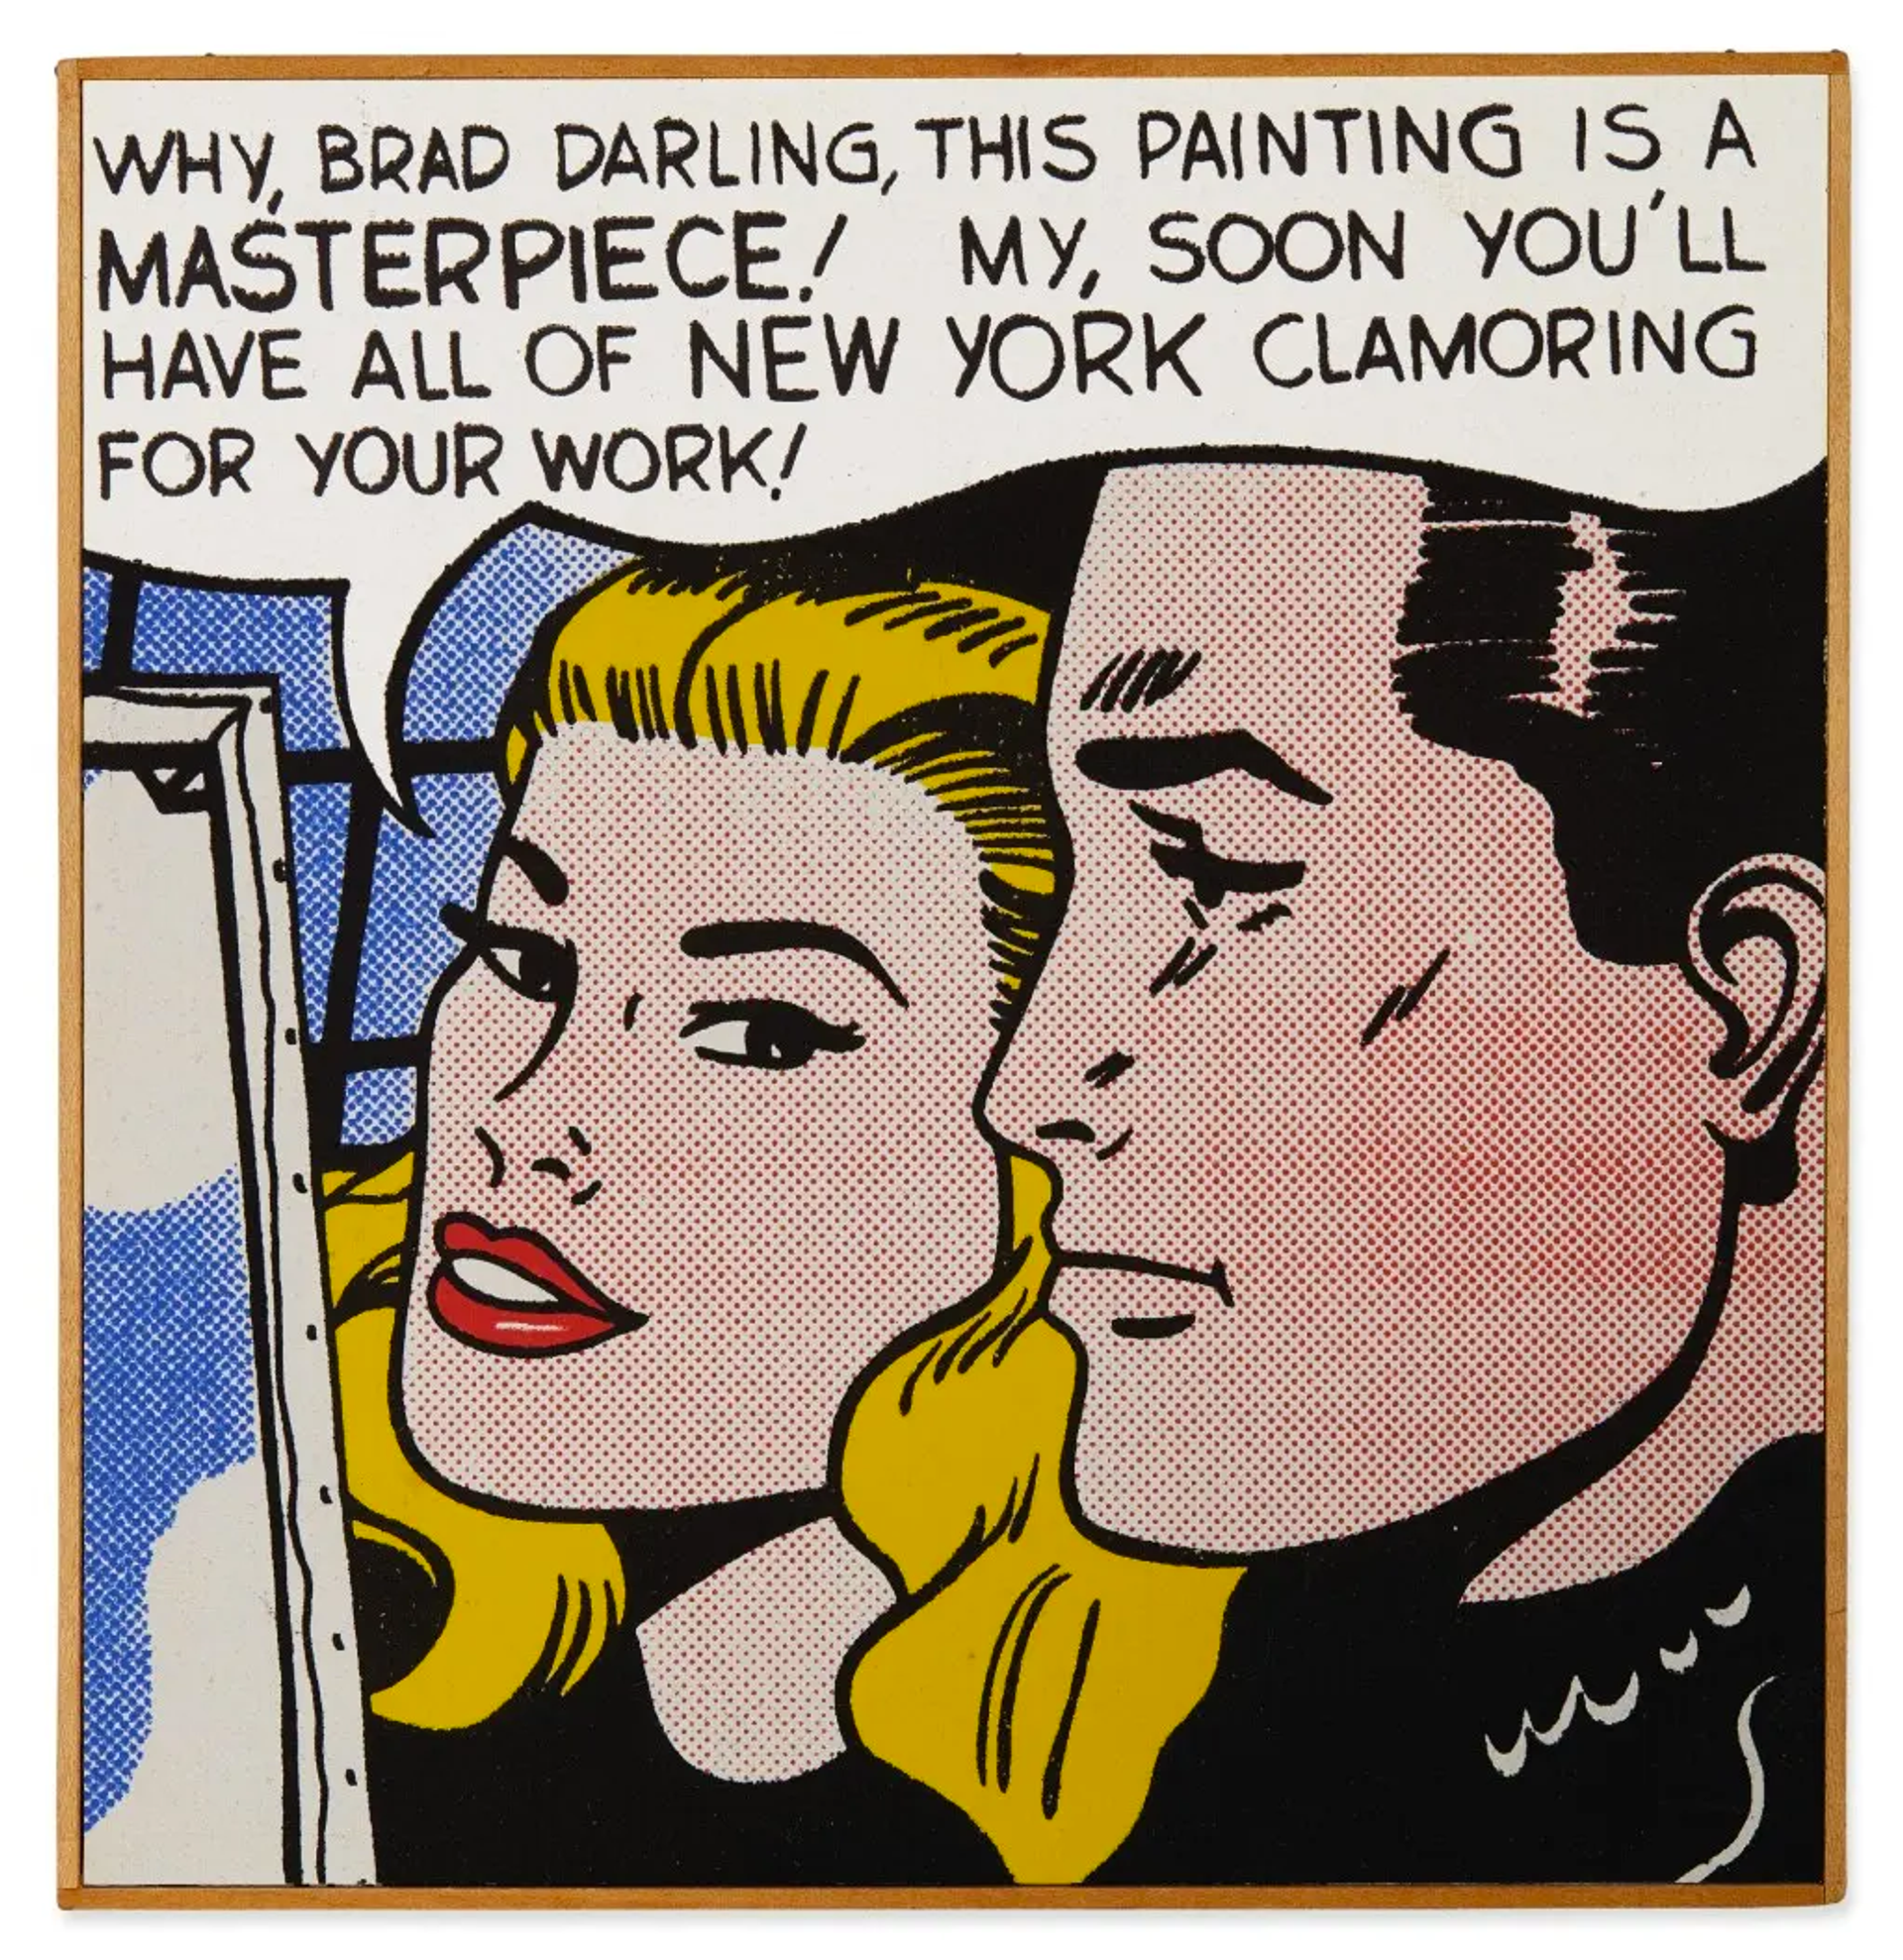 This work depicts a black haired man and a blonde woman standing in front of a canvas that faces away from the viewer. The speech bubble reads: "Why, Brad darling, This painting is a masterpiece! My, soon you'll have all of New York clamoring for your work!"